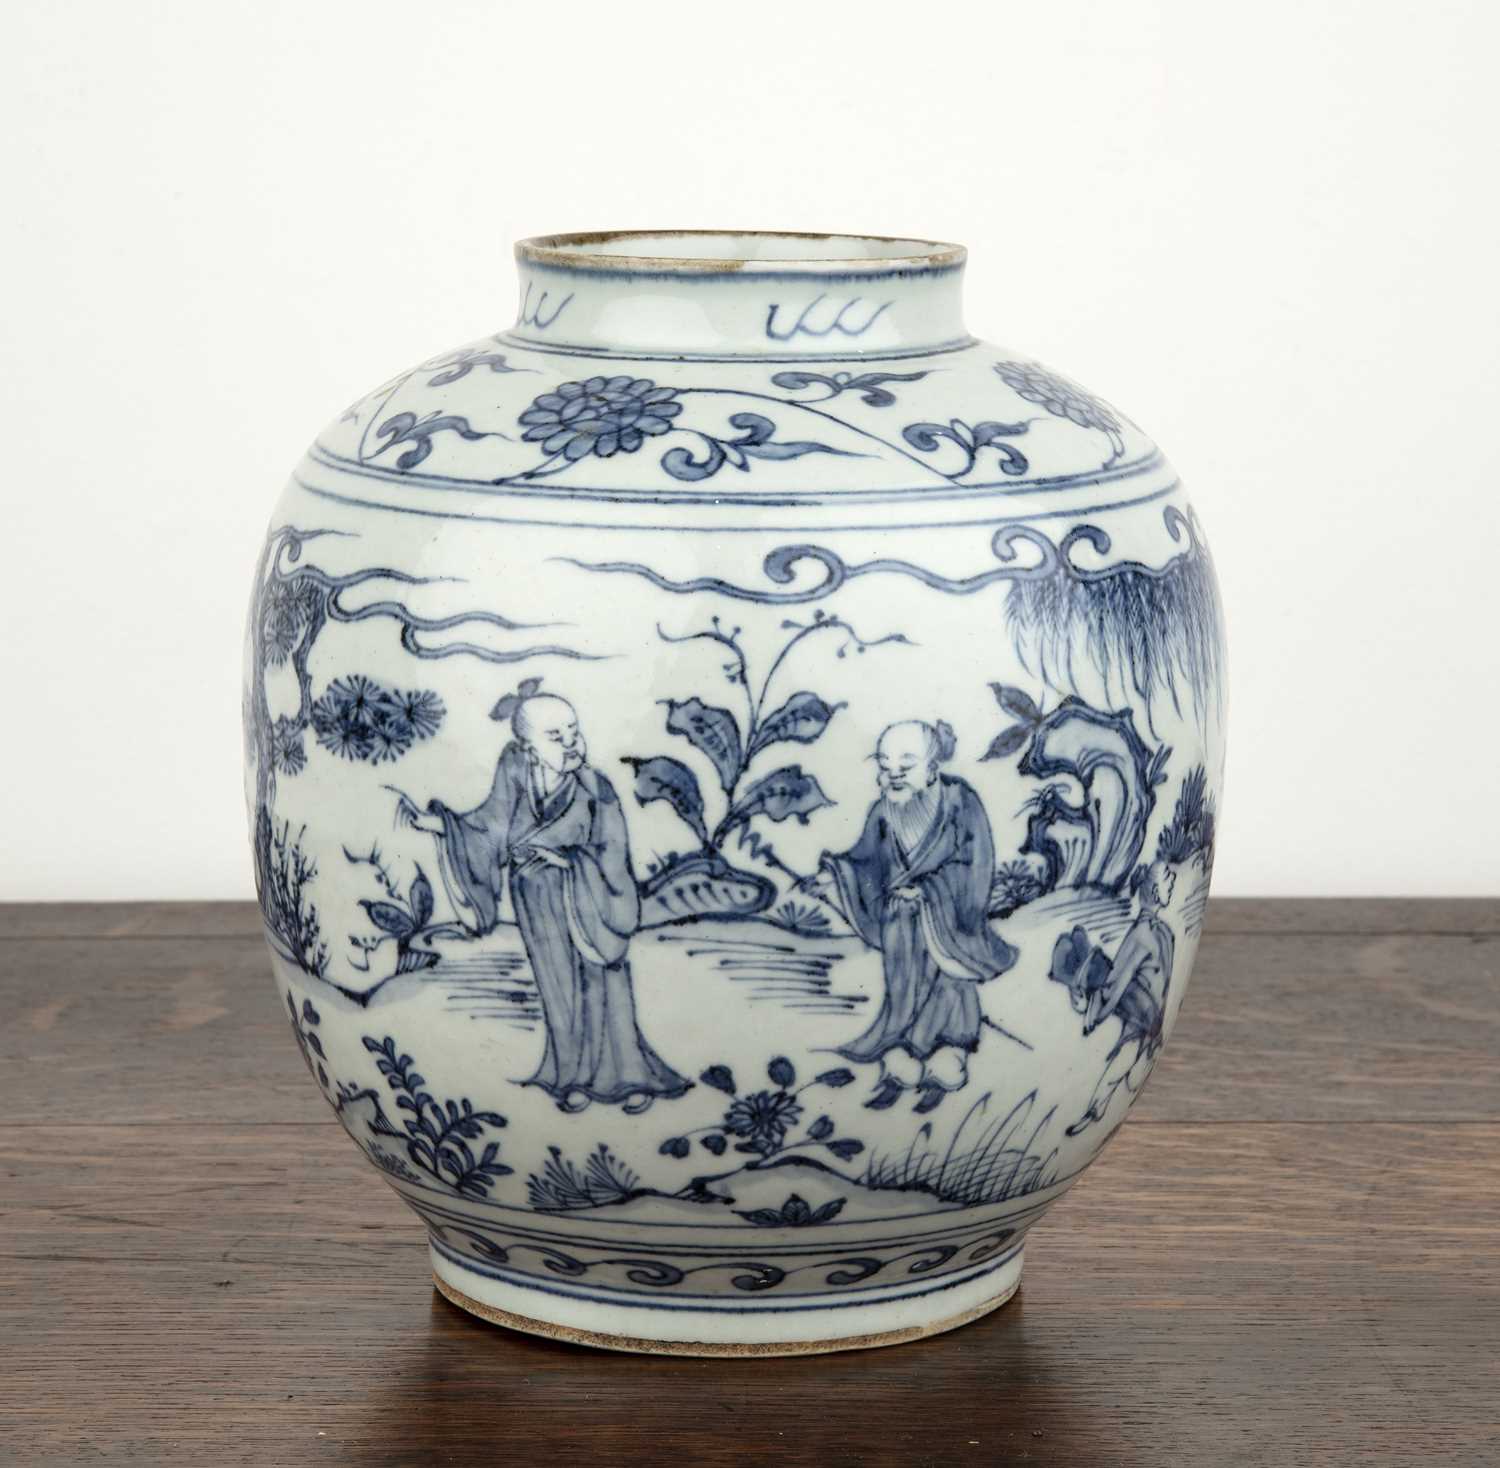 Lot Ming-style blue and white vase Chinese painted...